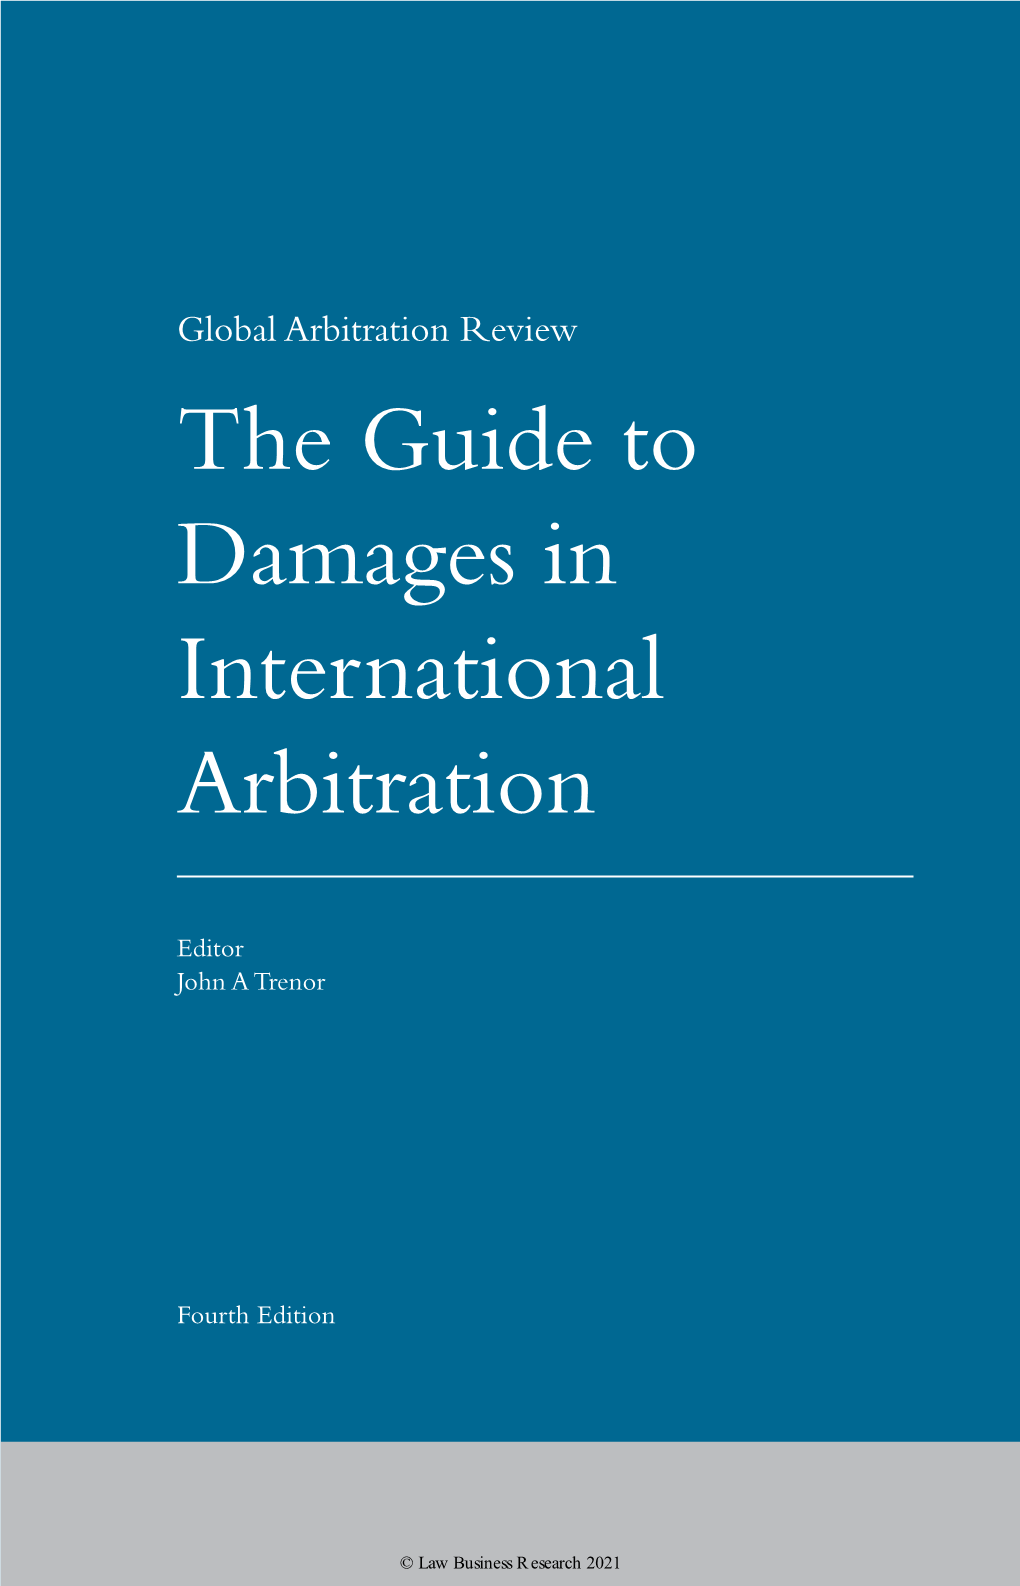 The Guide to Damages in International Arbitration